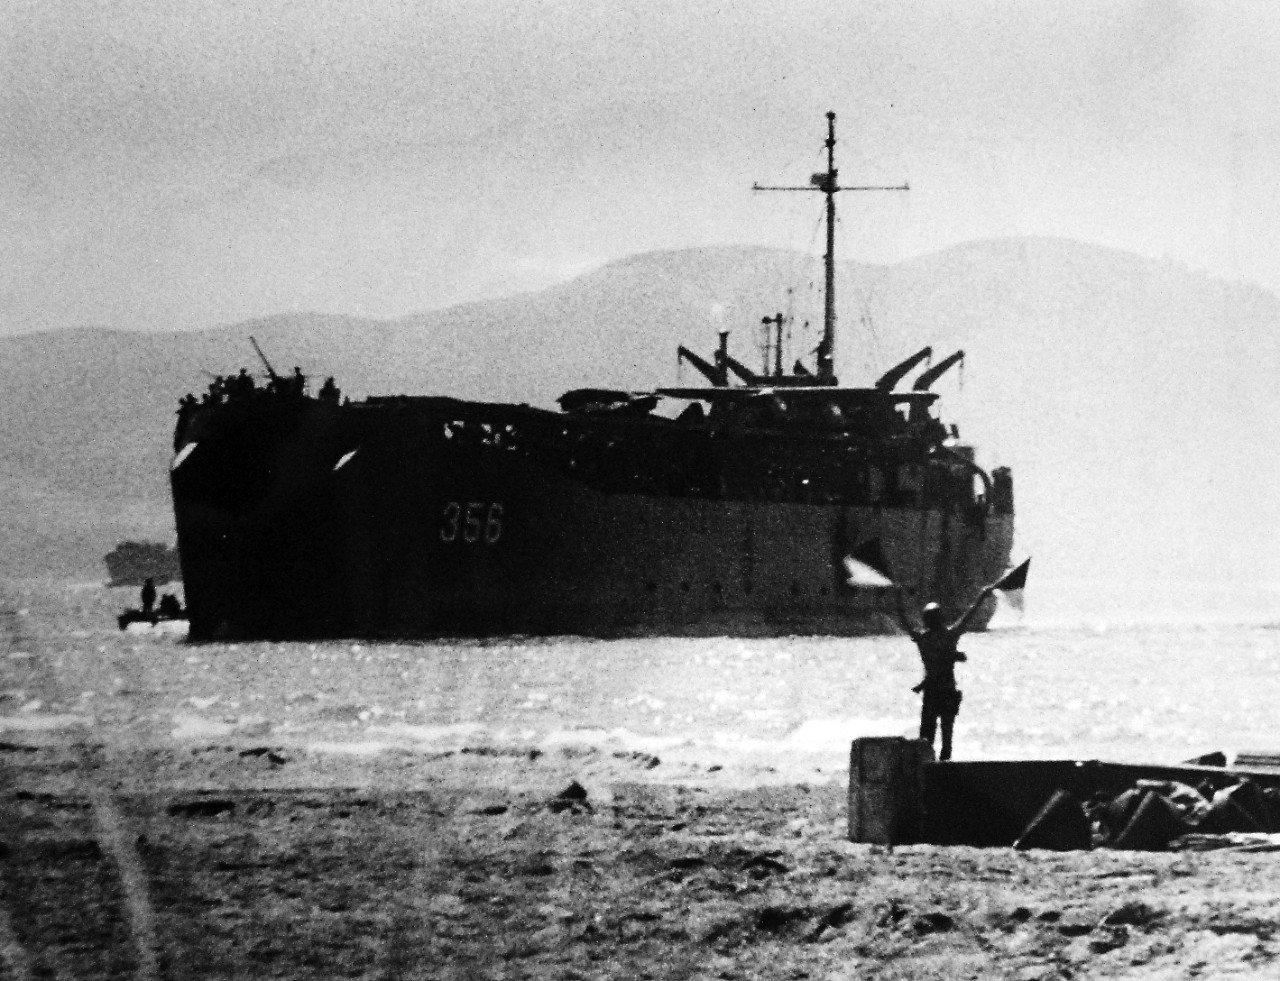 26-G-92443-1:   Operation Avalanche, September 1943.  “Talking” Off Paestum.  A U.S. Coast Guardsman signals to USS LST 356 whose bow doors yawn empty off Paestum, twenty miles south of Salerno, as the invasion gets under way.  This picture shows the open bow doors – hitherto a closely guarded military secret.   The ship has already discharged its cargo of motorized equipment .  Coast Guard and Navy personnel the LST craft.   Official U.S. Coast Guard Photograph. Photographed through Mylar sleeve.   Courtesy of the Library of Congress.  (2016/05/19). 